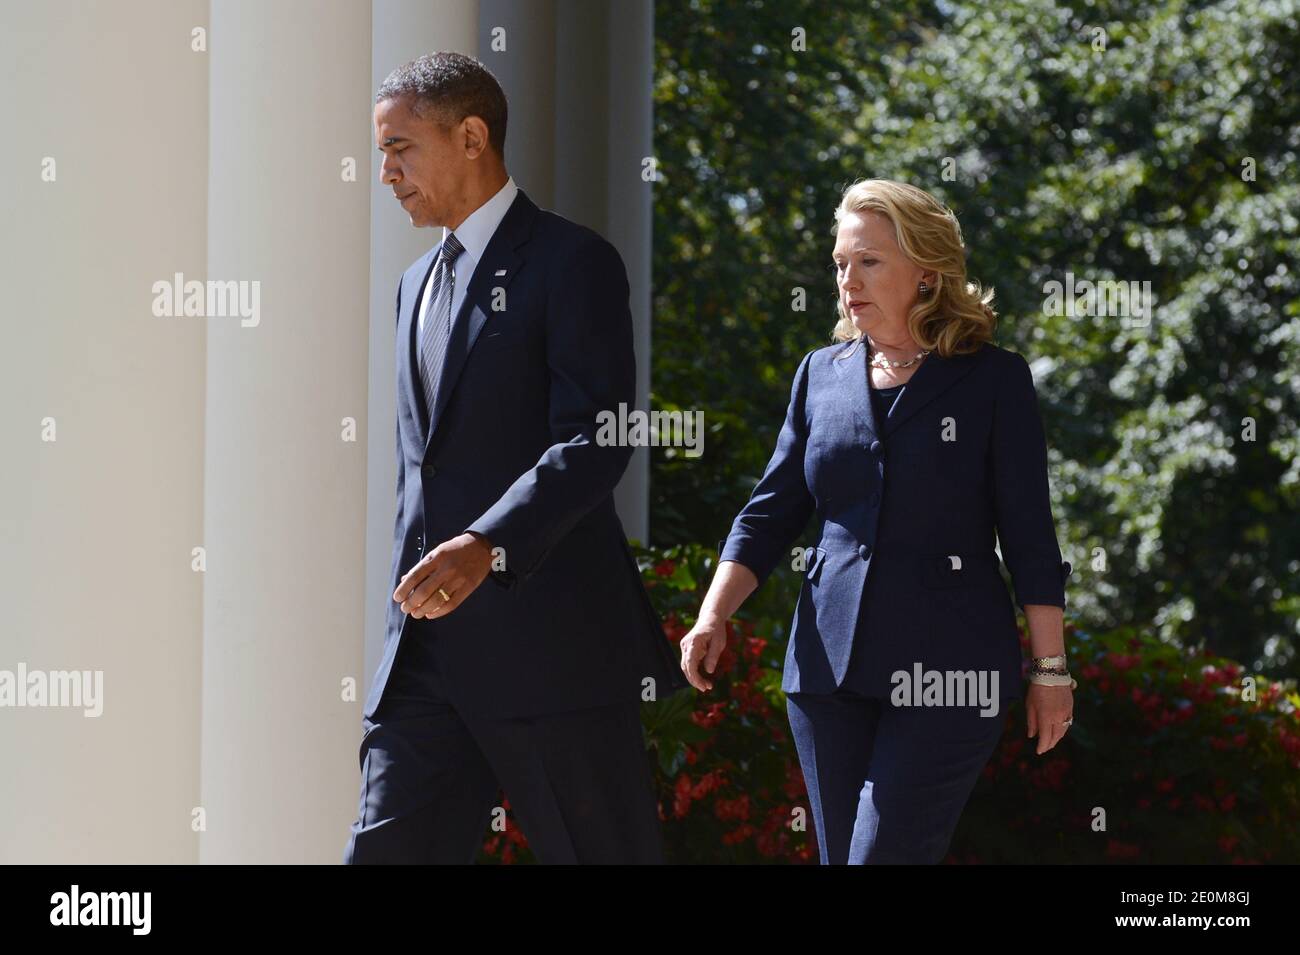 US President Barack Obama (L) walks down the Colonnade with US Secretary of State Hillary Clinton (R) to deliver remarks on the killing of US ambassador to Libya, Christopher Stevens, and three embassy staff, in the Rose Garden of the White House in Washington DC, USA on September 12, 2012. Gunmen attacked the US consulate in Benghazi, killing US ambassador to Libya, Christopher Stevens, late 11 September 2012, while another assault took place on the US embassy in Cairo. Photo by Michael Reynolds/Pool/ABACAPRESS.COM Stock Photo